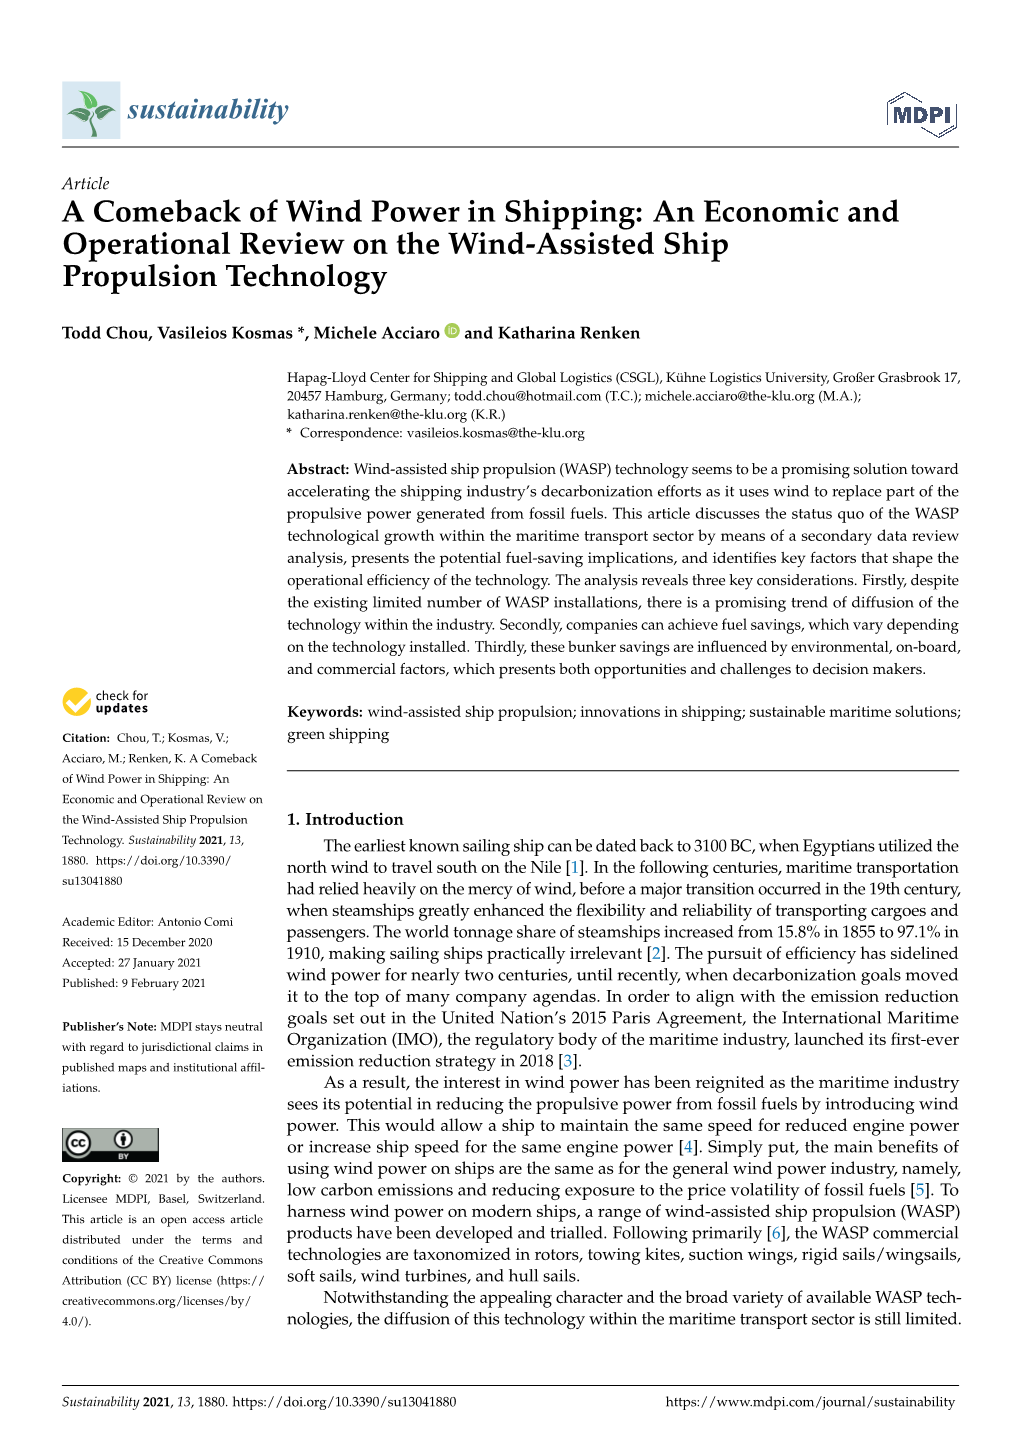 A Comeback of Wind Power in Shipping: an Economic and Operational Review on the Wind-Assisted Ship Propulsion Technology